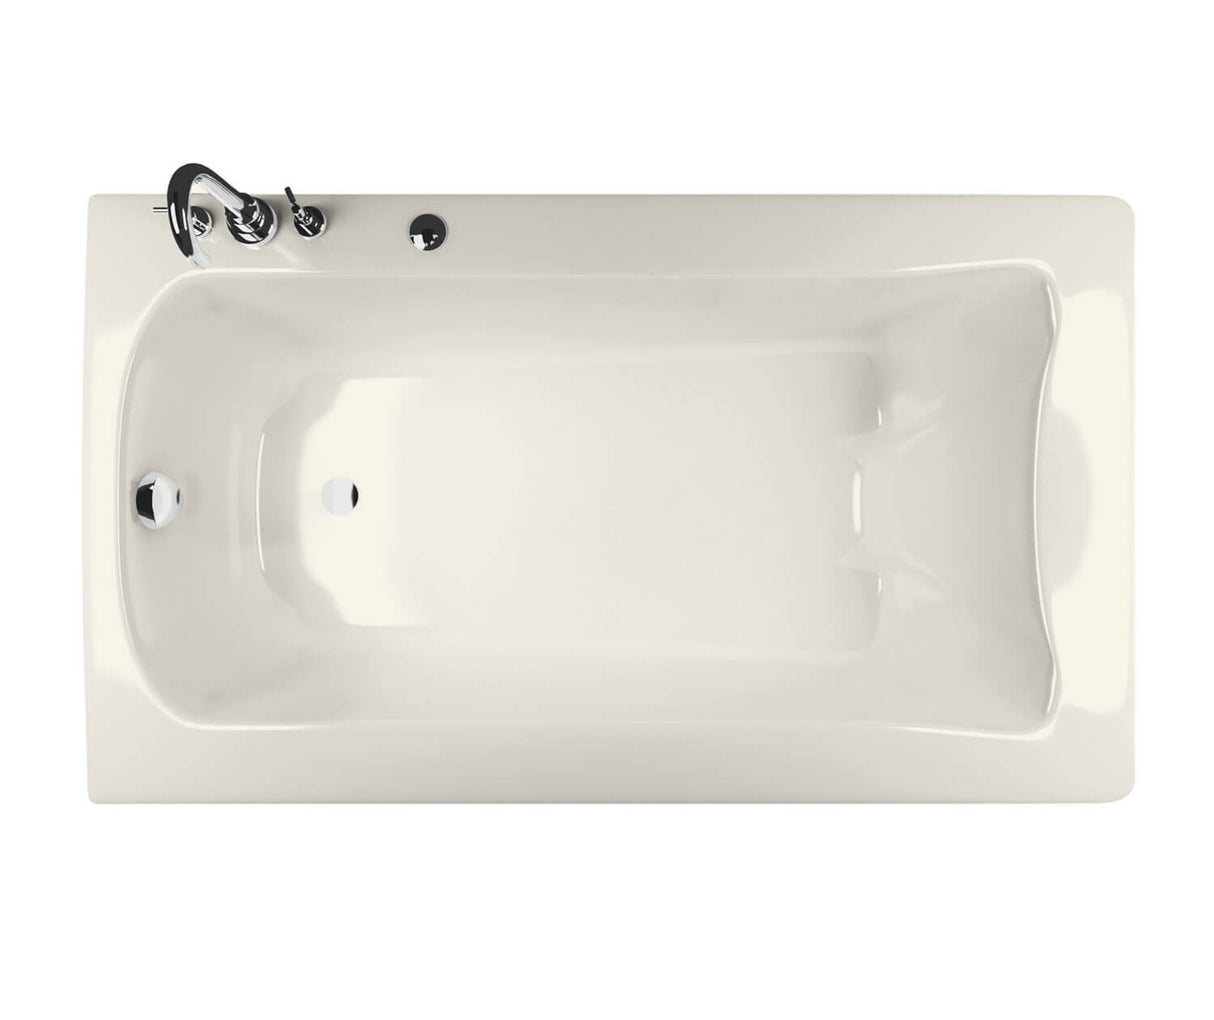 MAAX 105311-R-094-007 Release 6036 Acrylic Drop-in Right-Hand Drain Combined Hydromax & Aerofeel Bathtub in Biscuit